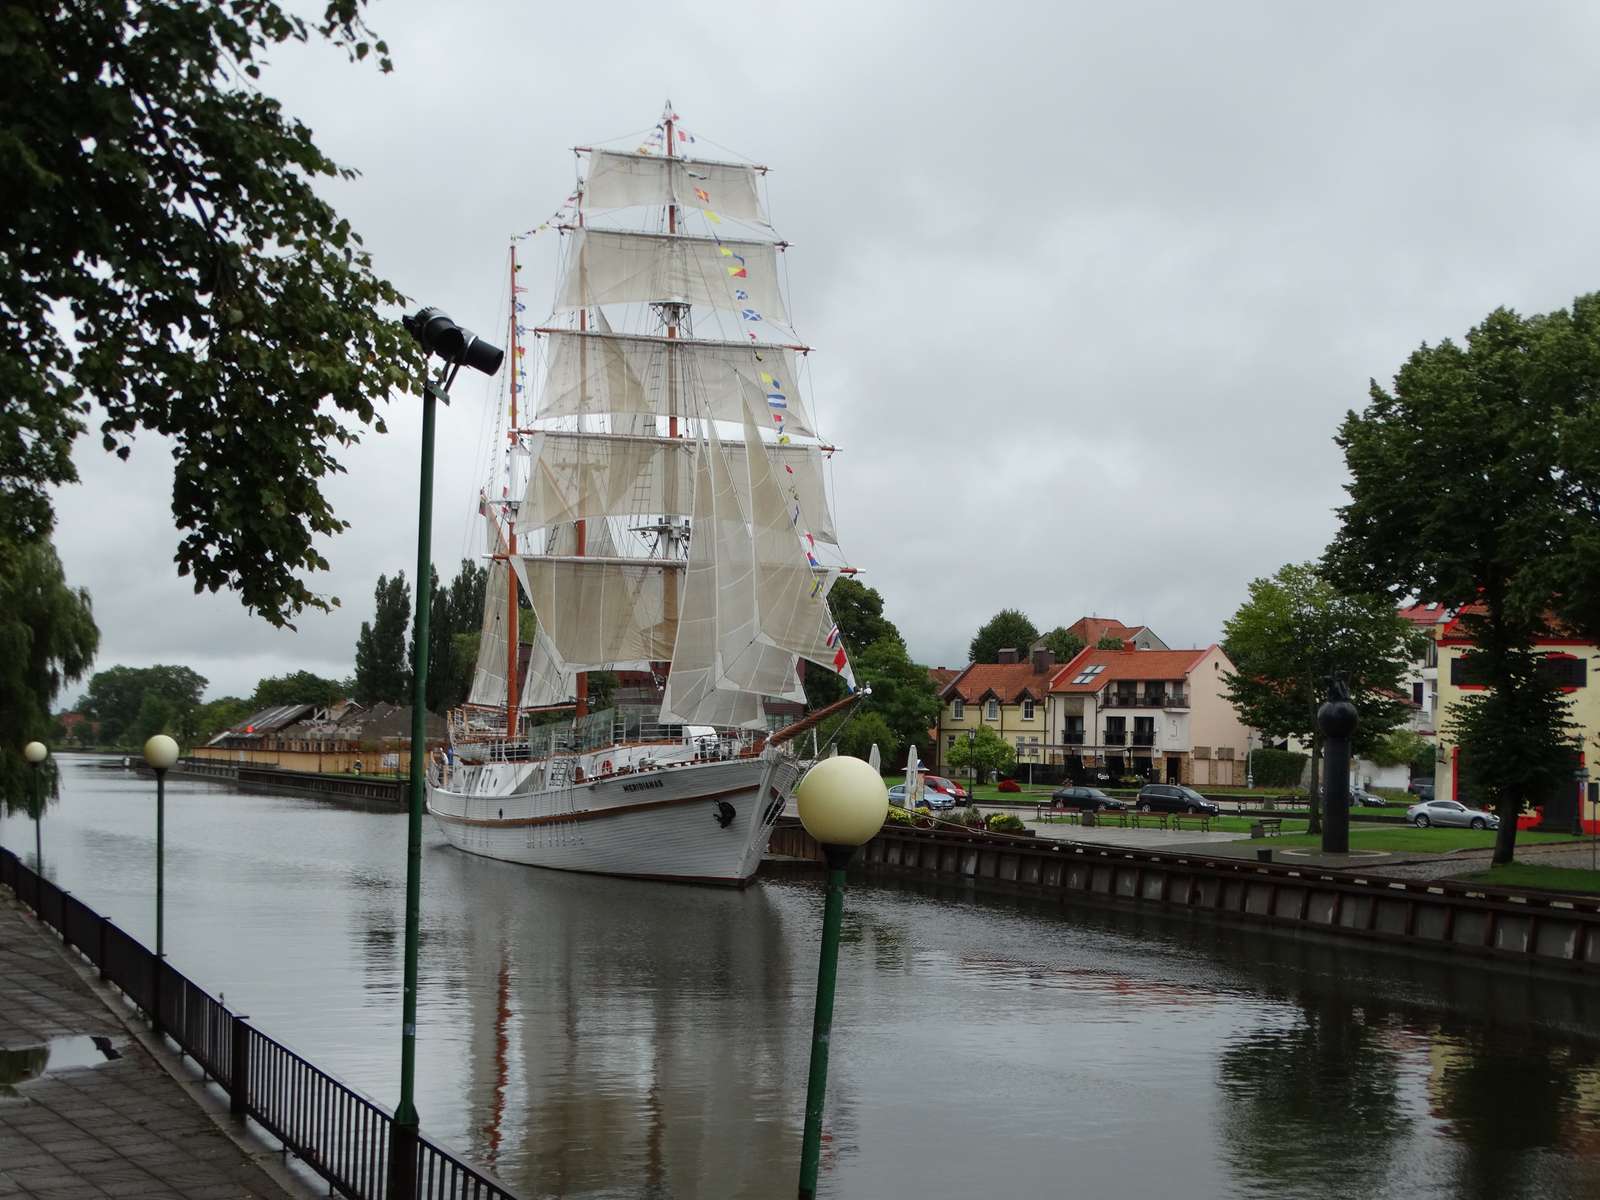 Meridian sailboat in Klaipeda puzzle online from photo